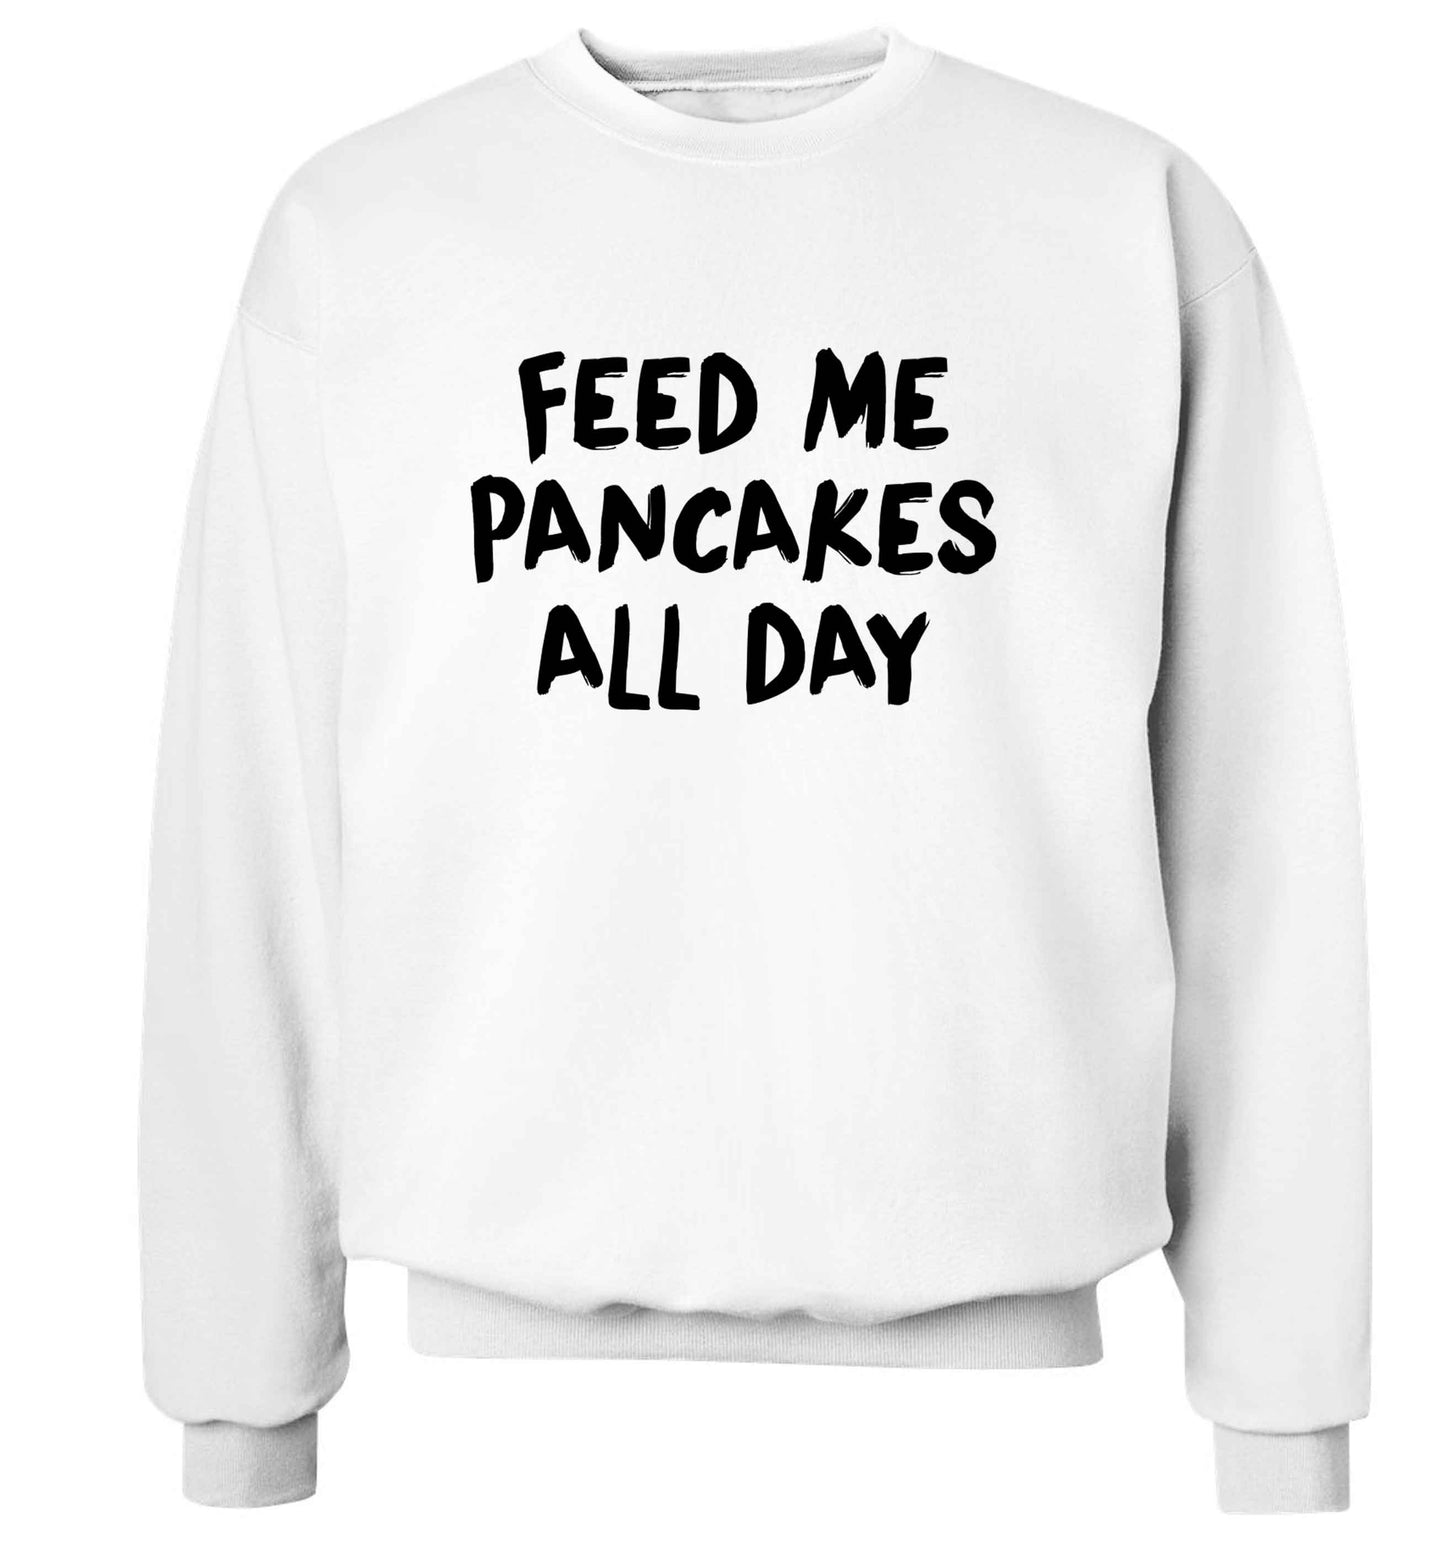 Feed me pancakes all day adult's unisex white sweater 2XL